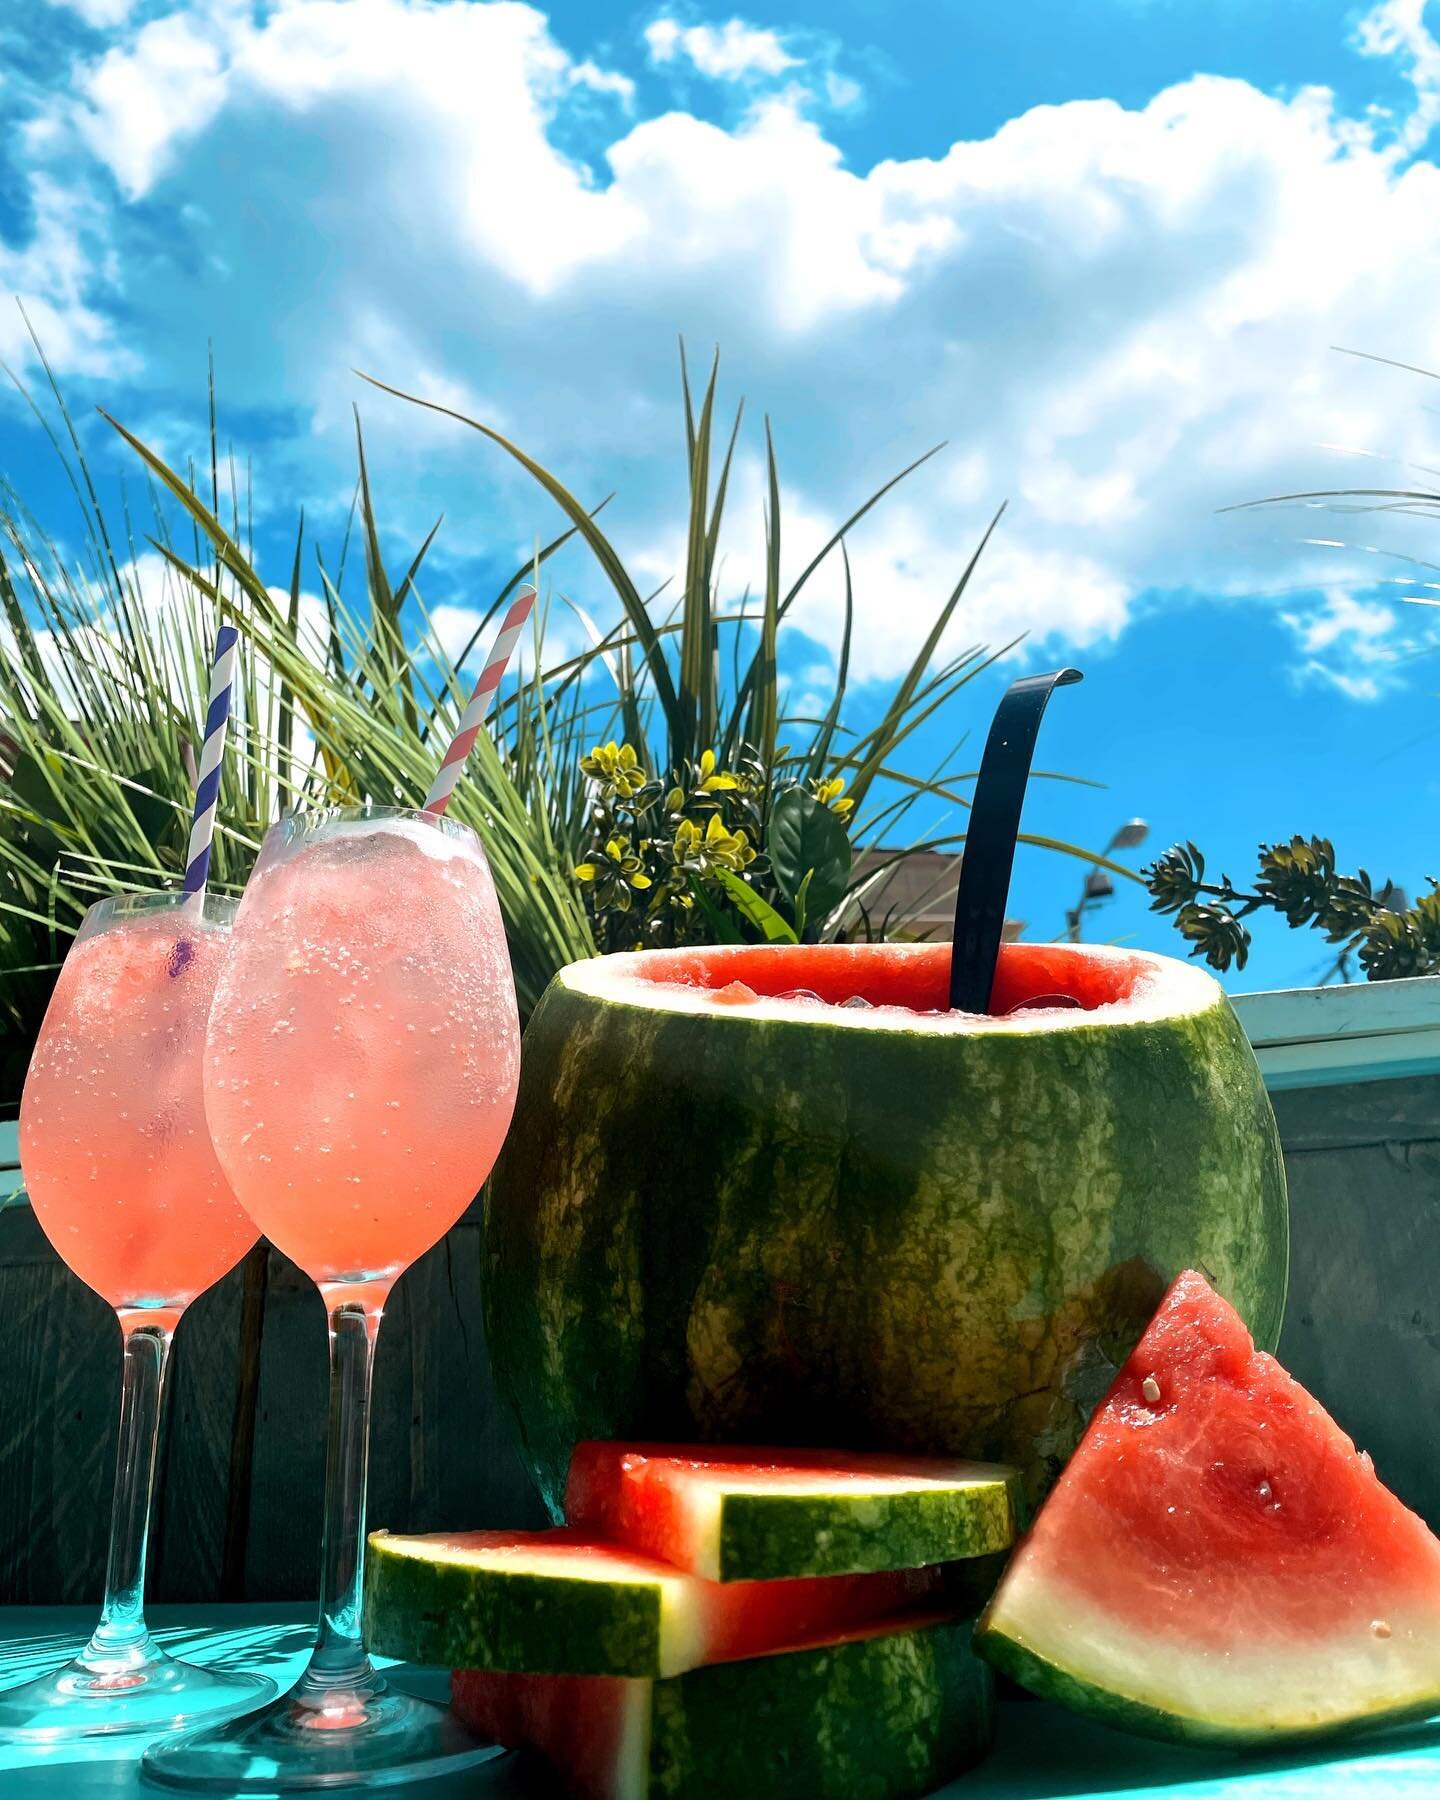 But have you had our Whatta Melon keg yet? @skyyvodka , fresh watermelon, mint, all served in a watermelon! 🍉